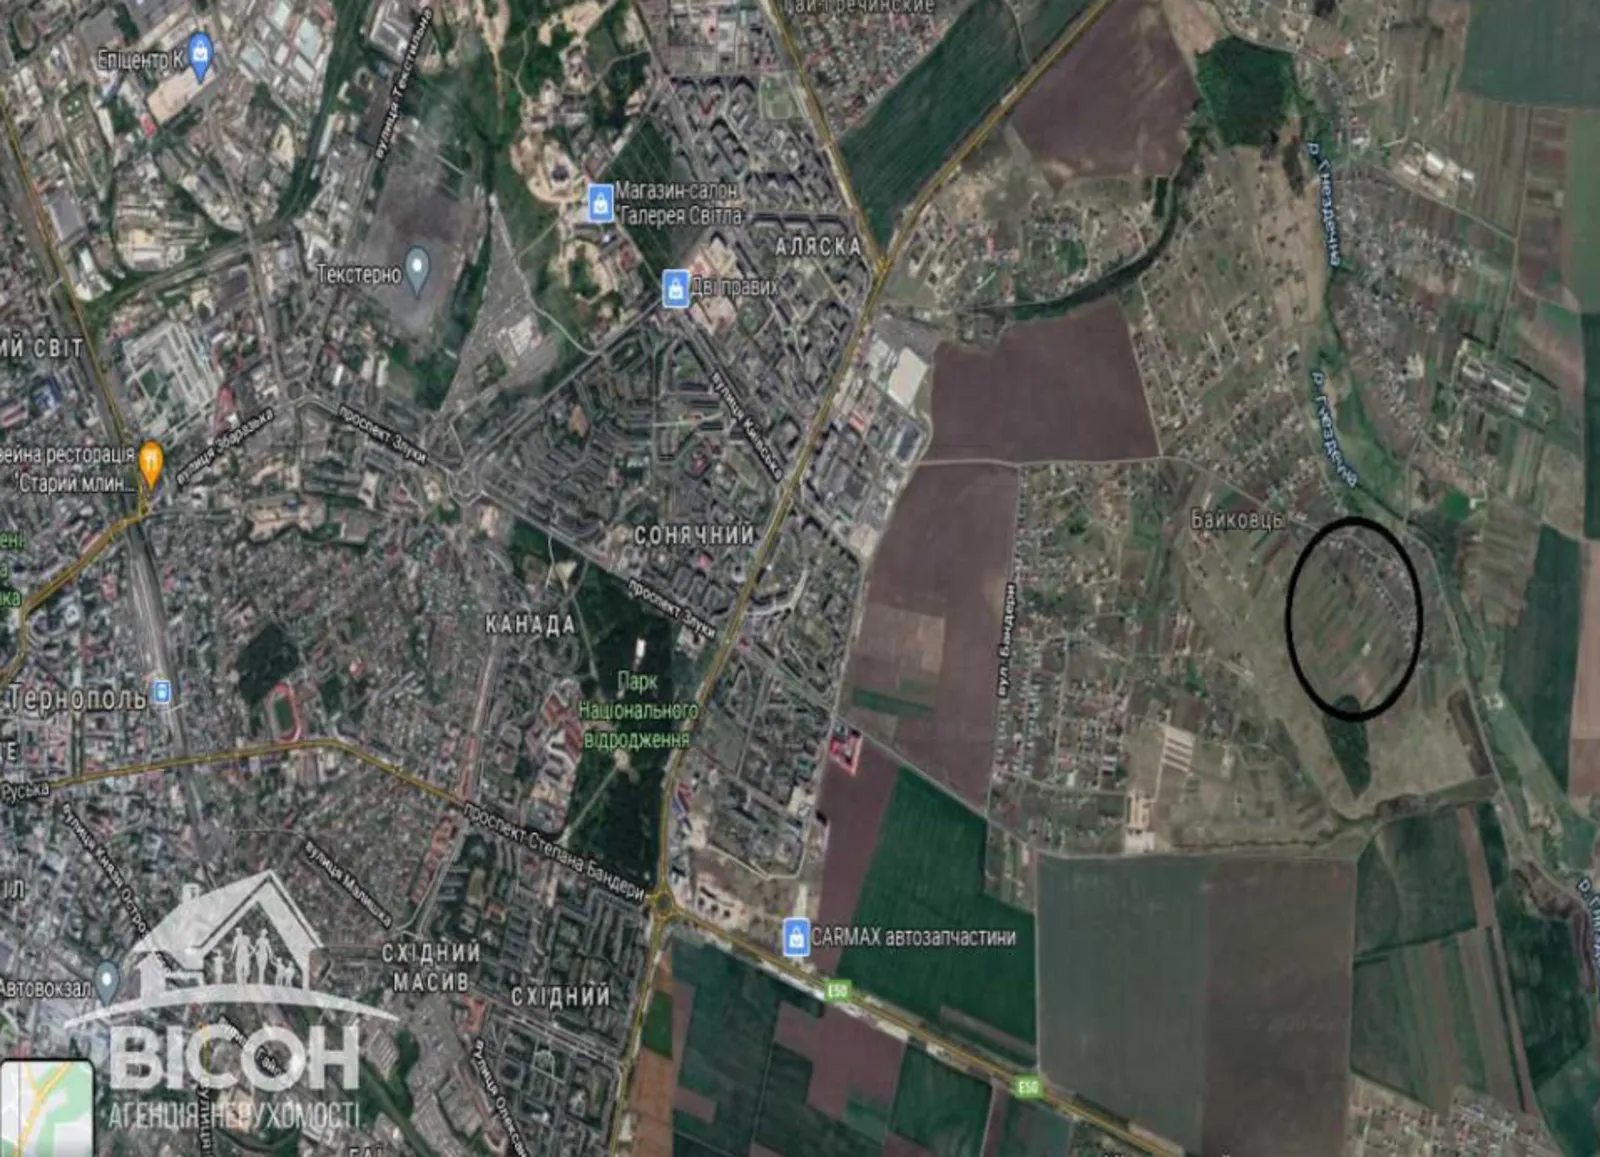 Land for sale for residential construction. Rusanivka, Baykovtsy. 